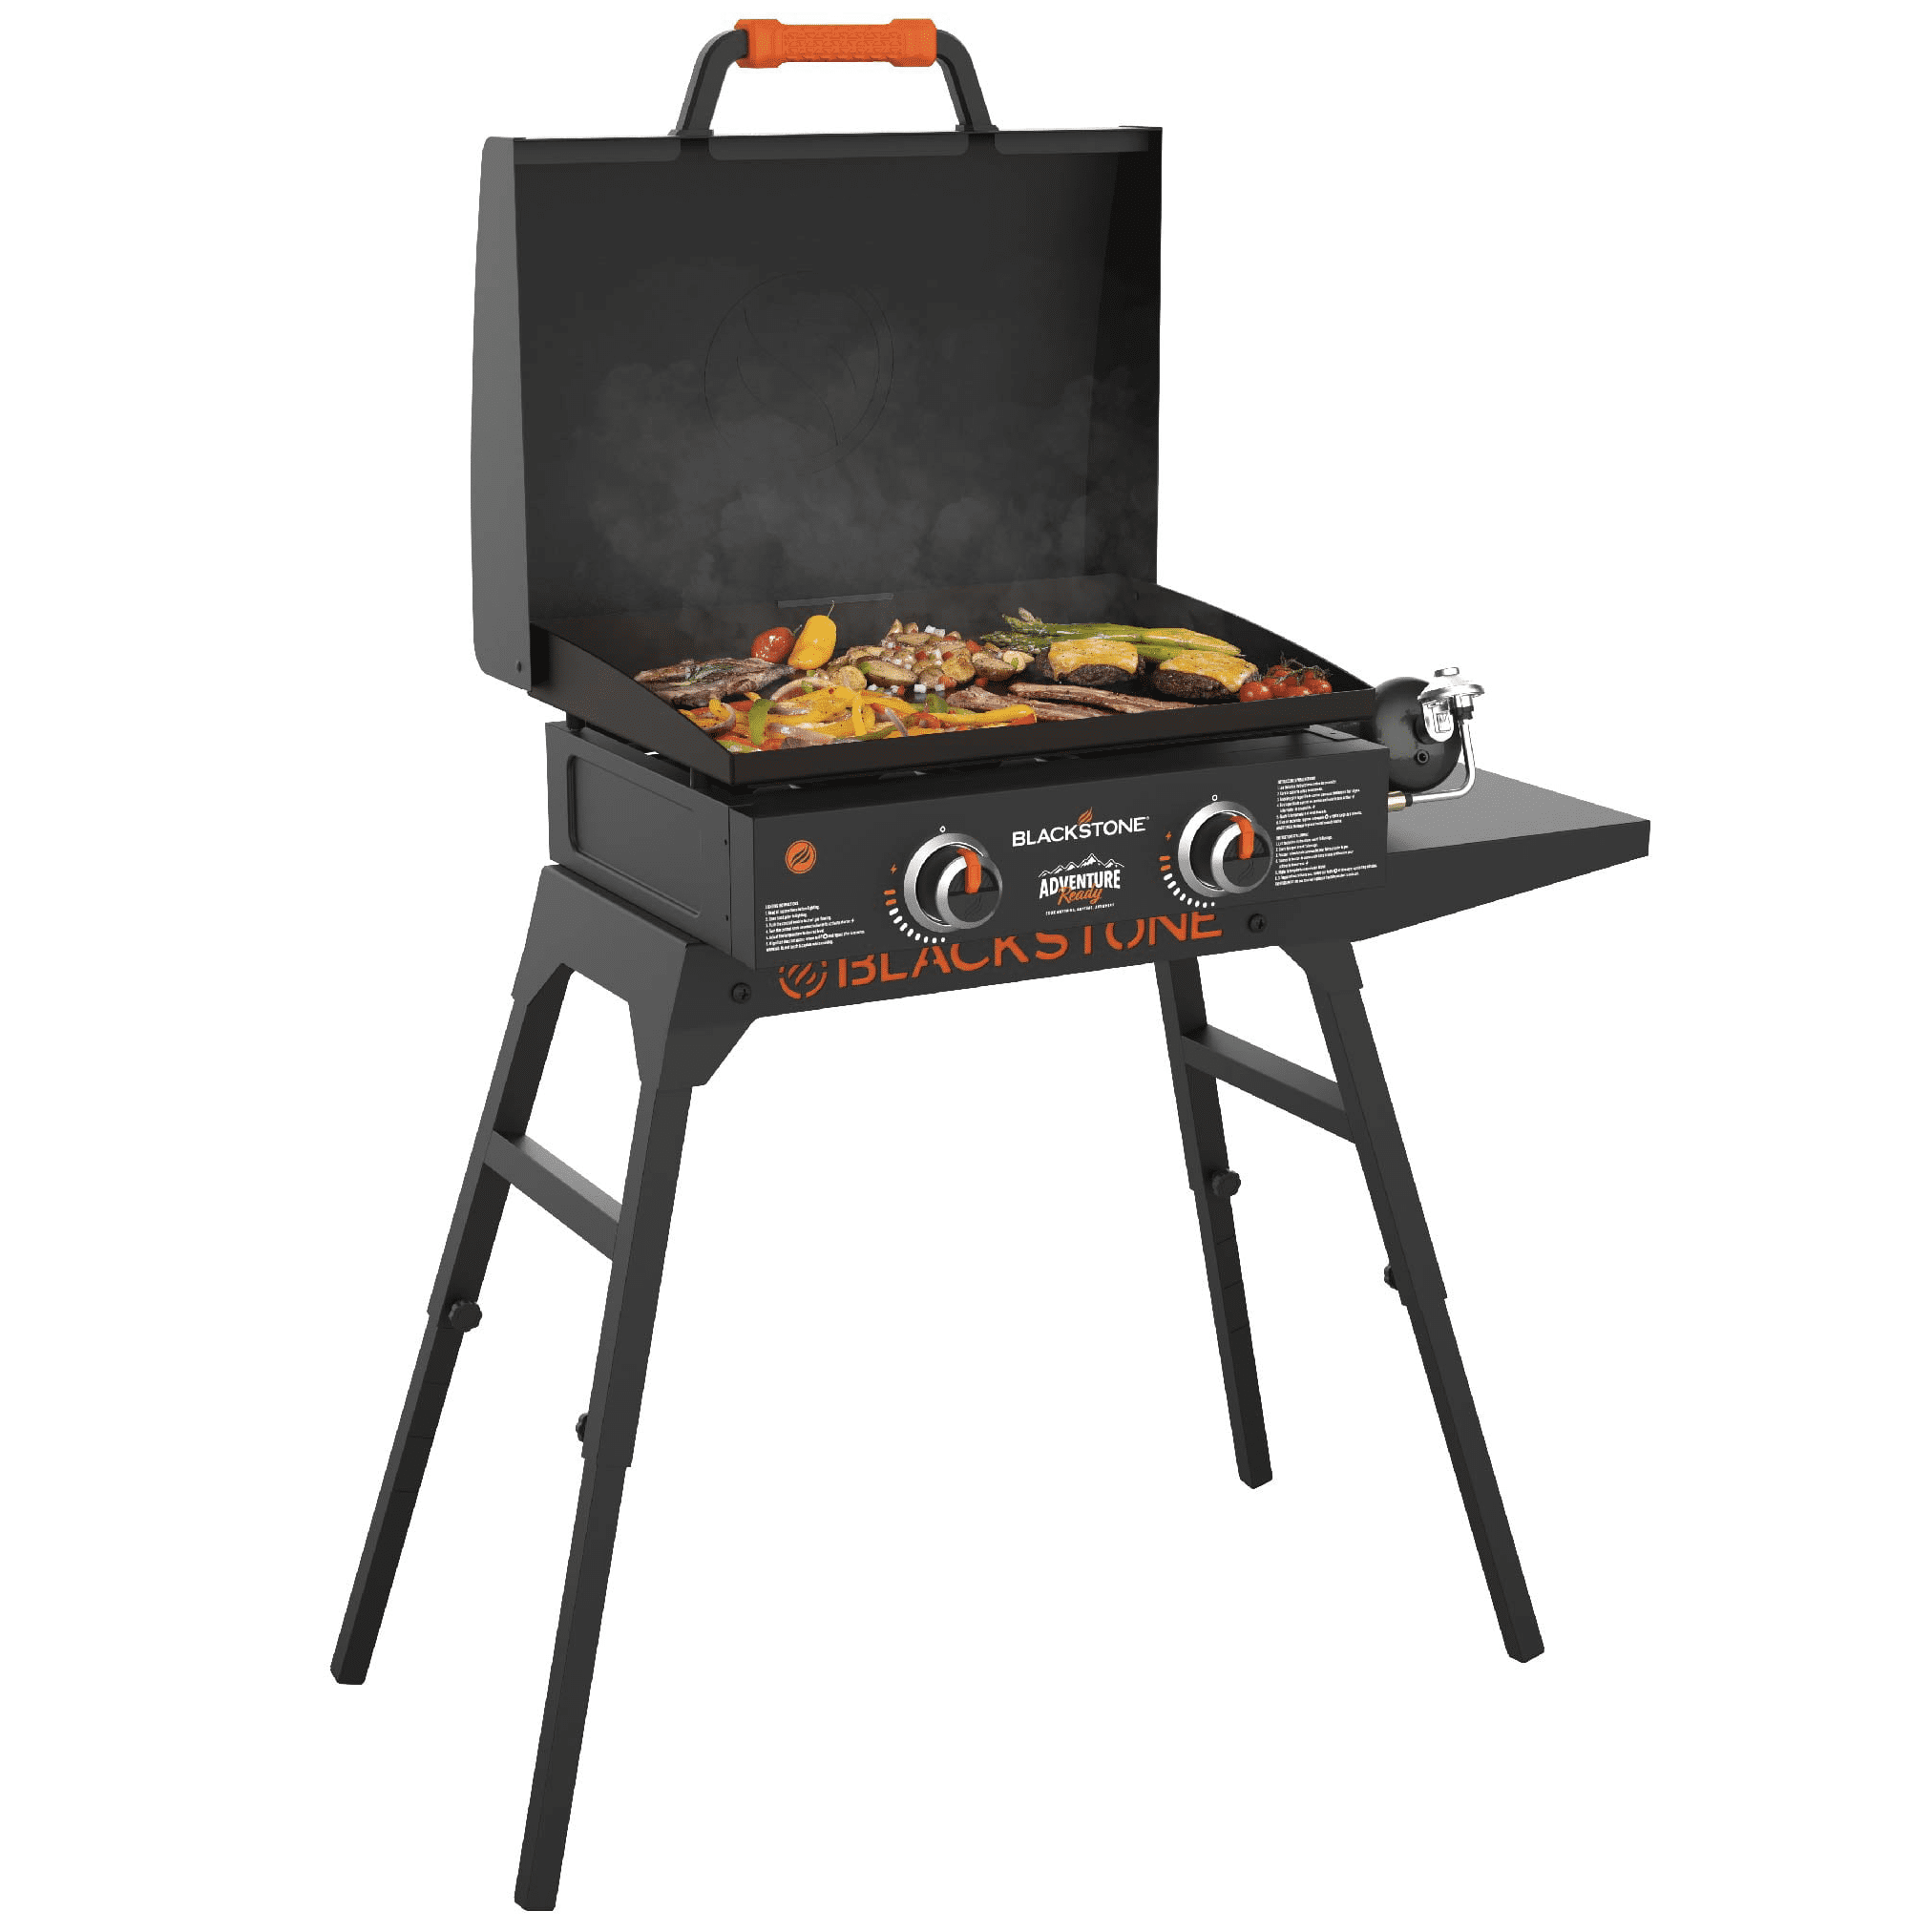 Blackstone Adventure Ready 22" Griddle with Stand and Adapter Hose $184